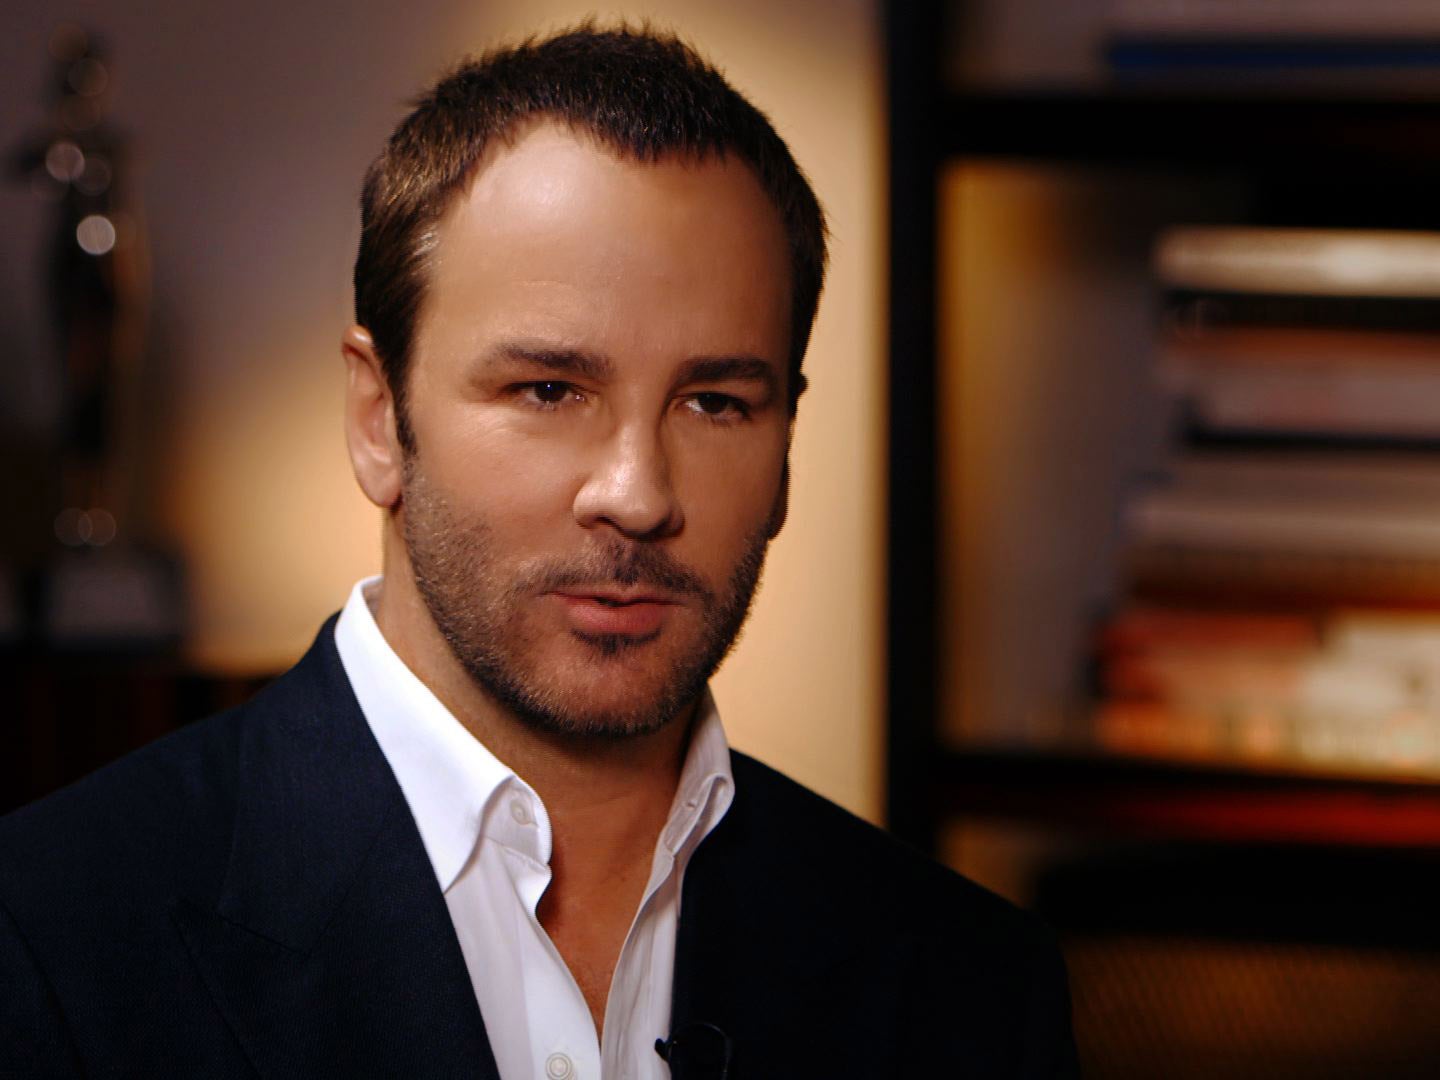 Tom Ford on his fall out with Yves Saint Laurent, dressing his